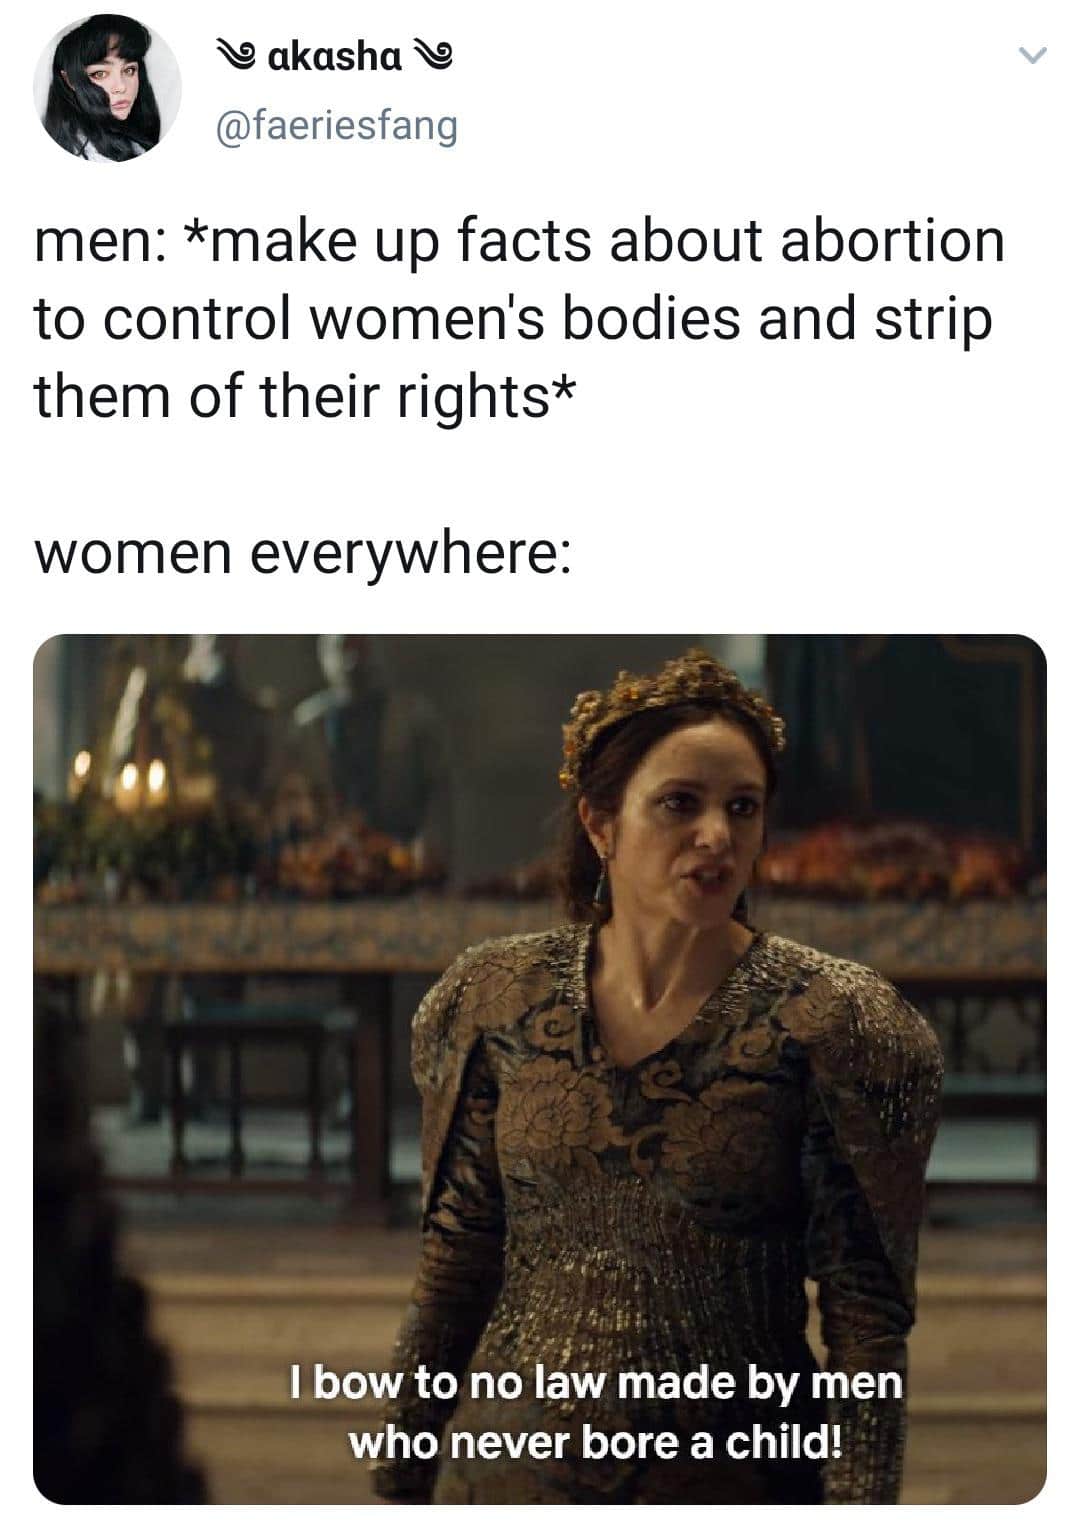 Women, Witcher, The Witcher, Pavetta, Geralt, Netflix feminine memes Women, Witcher, The Witcher, Pavetta, Geralt, Netflix text: akasha @faeriesfang men: *make up facts about abortion to control womenls bodies and strip them of their rights* women everywhere: ——1 bow to no law made by men who never bore a child! 